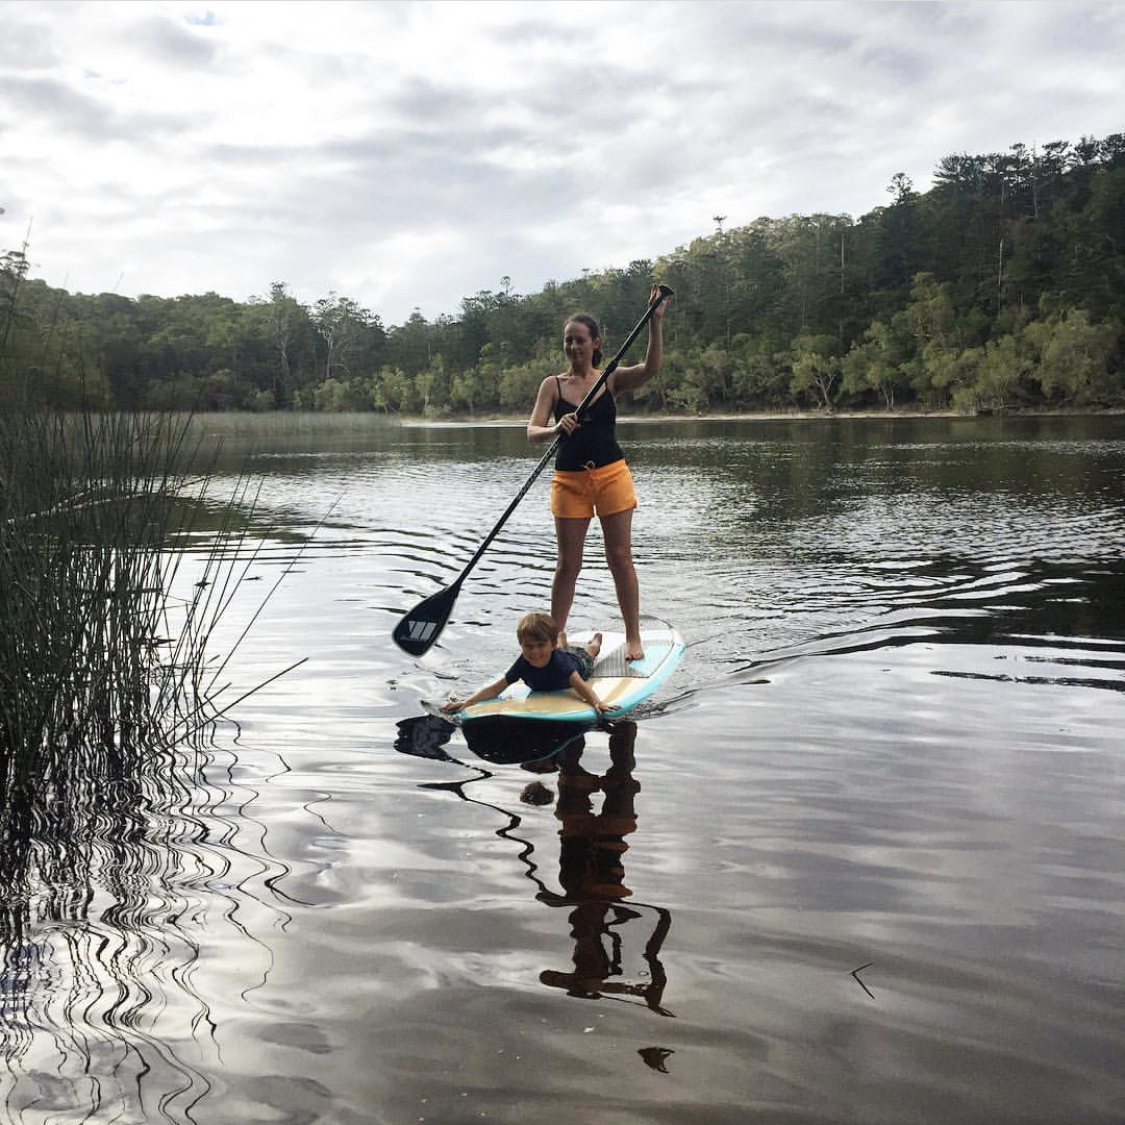 SUP’ing on Lake Allom which is also filled with hundreds of little turtles. If you stay still and quiet for long enough, they will swim right up to the water’s edge and you will see them poke their heads above the water.